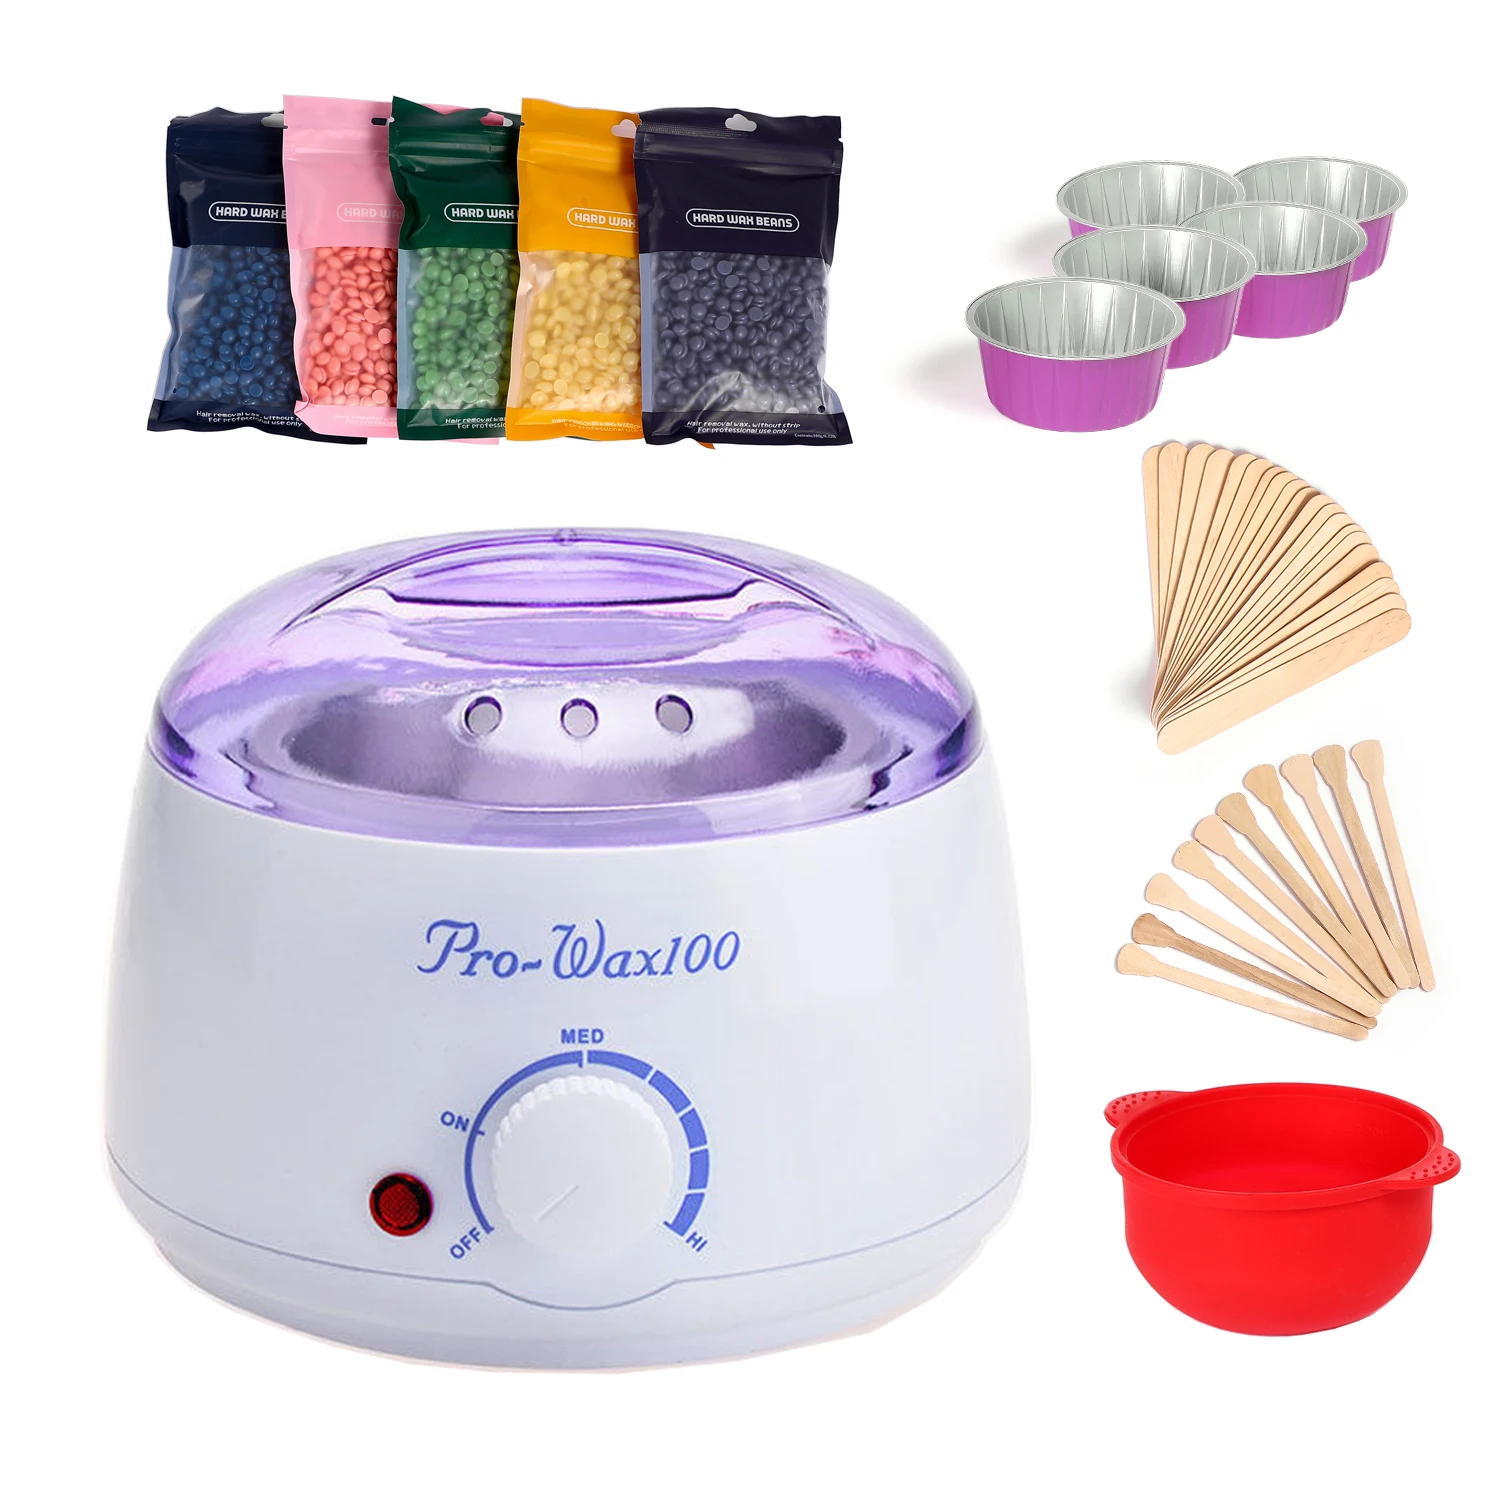 

Professional Wax Heater Warmer SPA Hair Removal Wax Beans Waxing Kit, White pink blue etc.or customized